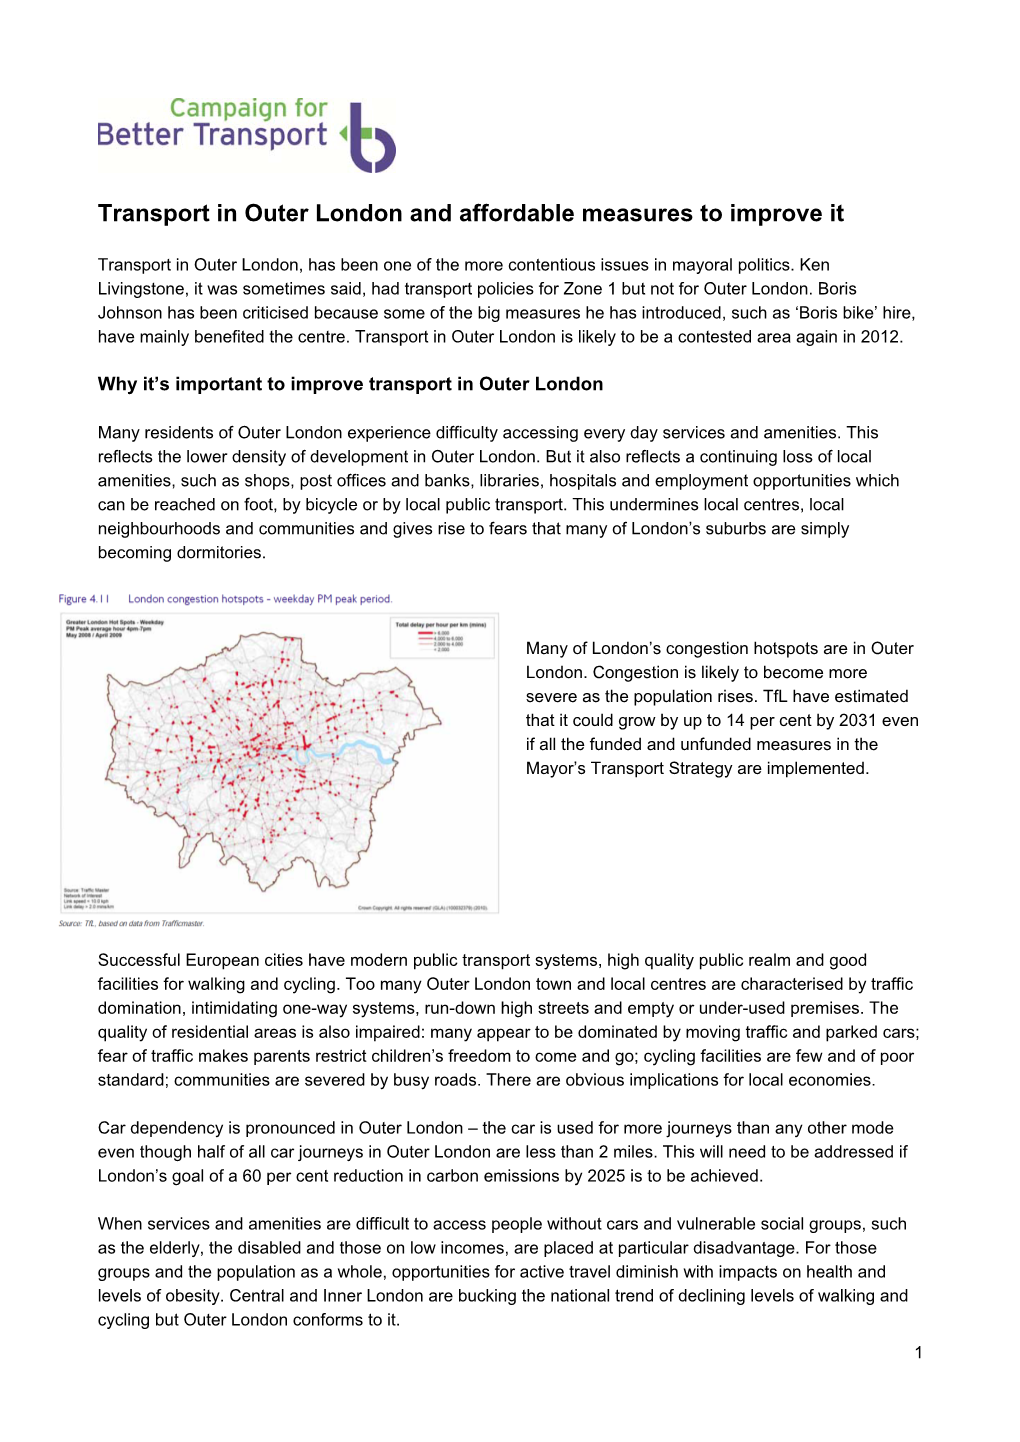 Transport in Outer London and Affordable Measures to Improve It